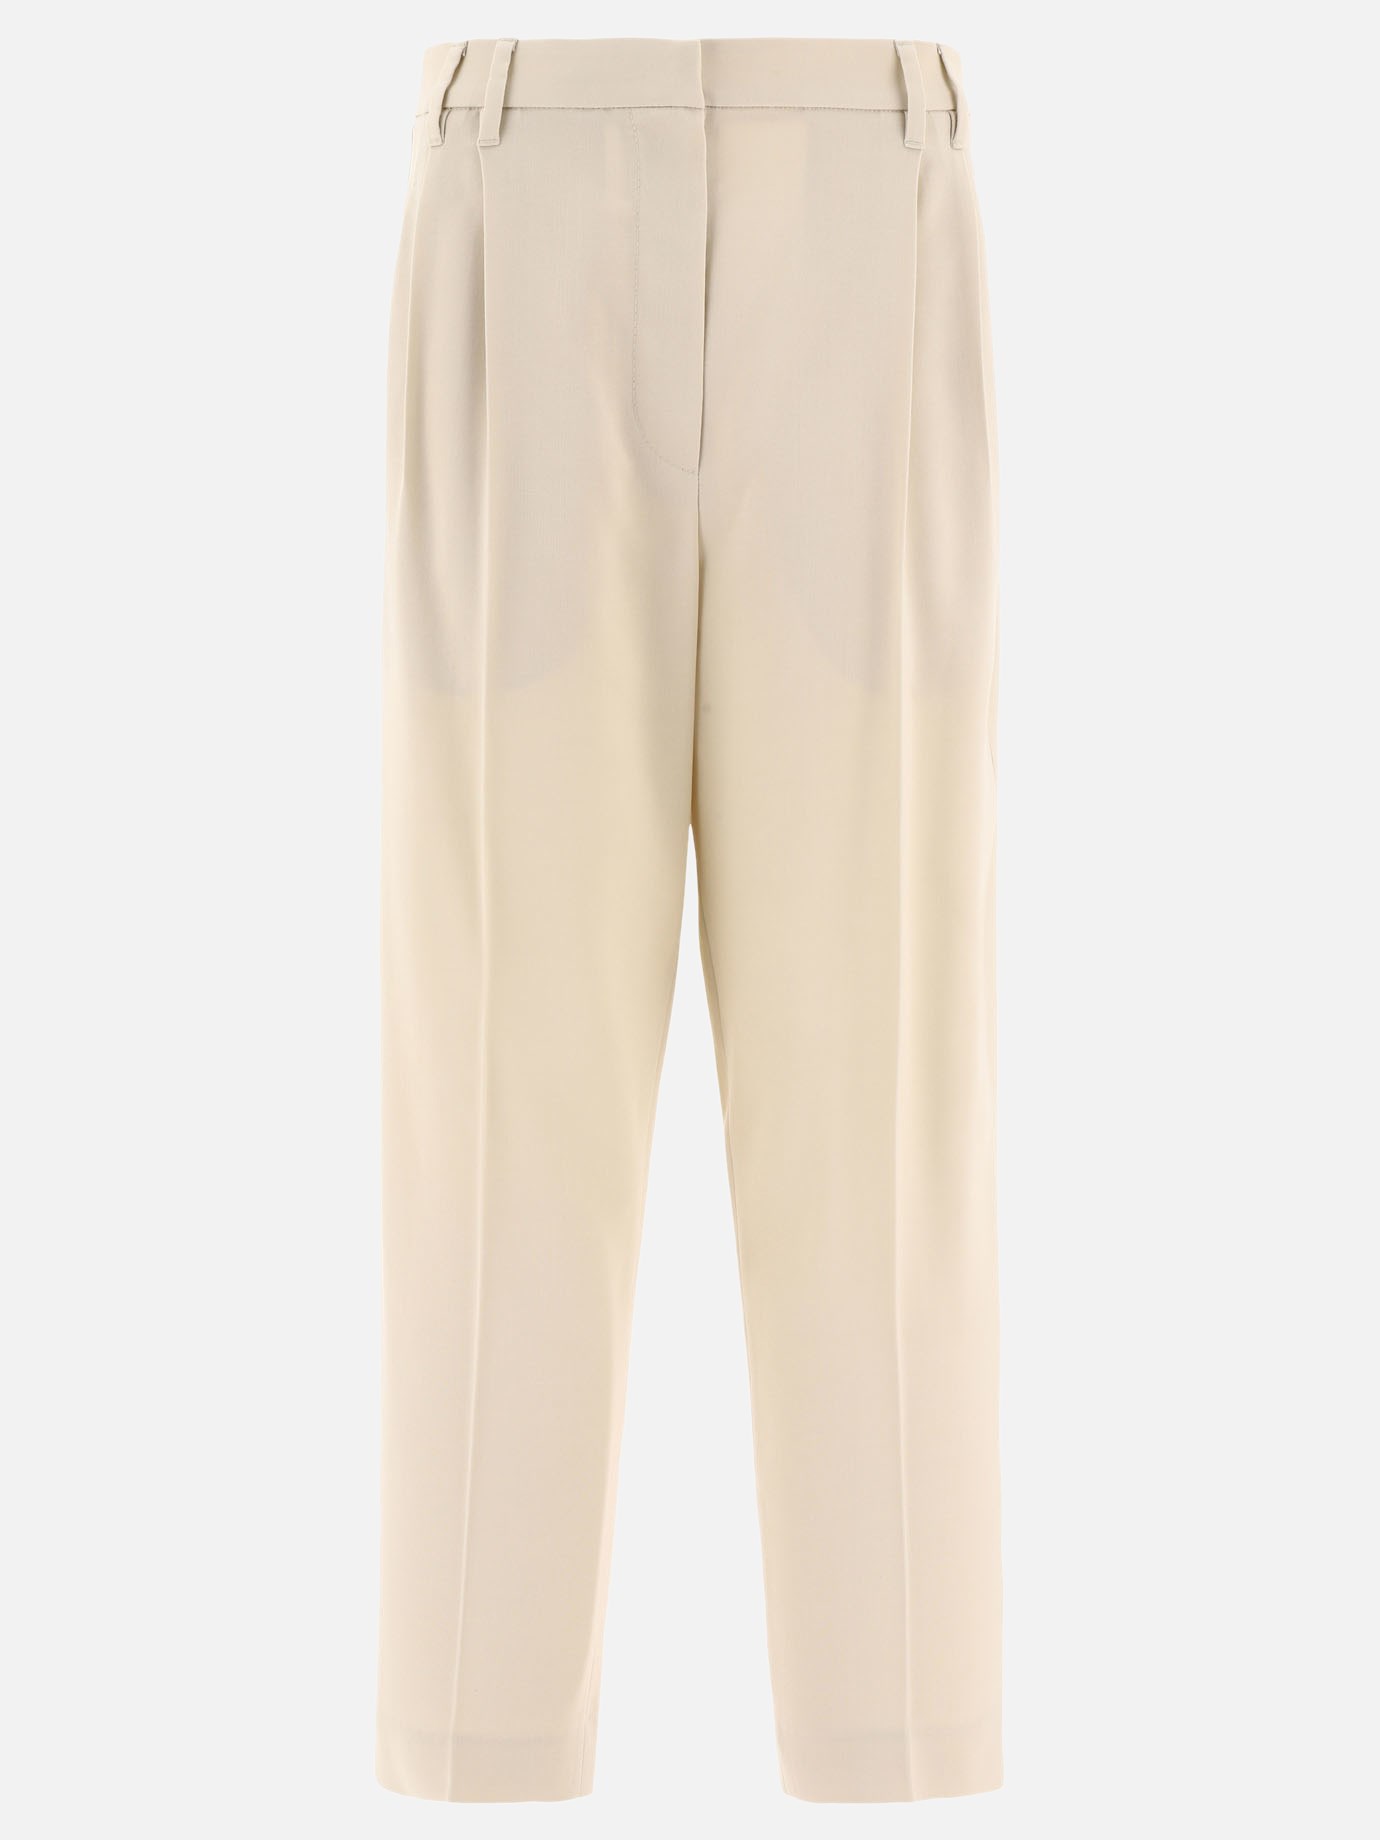 Tailored trousers with rhinestonesby Brunello Cucinelli - 3